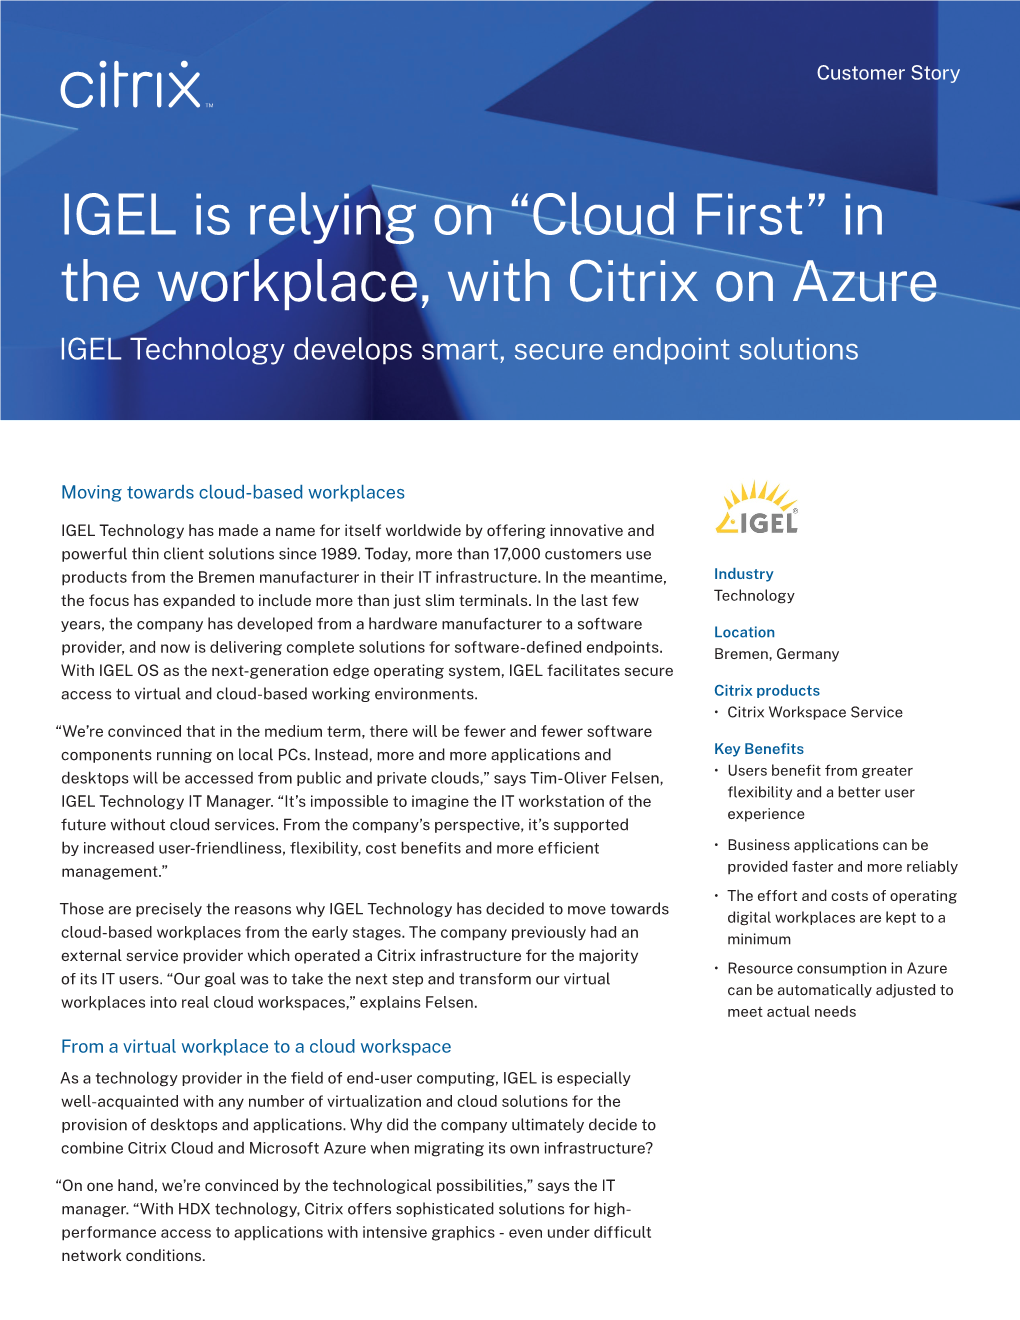 IGEL Is Relying on “Cloud First” in the Workplace, with Citrix on Azure IGEL Technology Develops Smart, Secure Endpoint Solutions